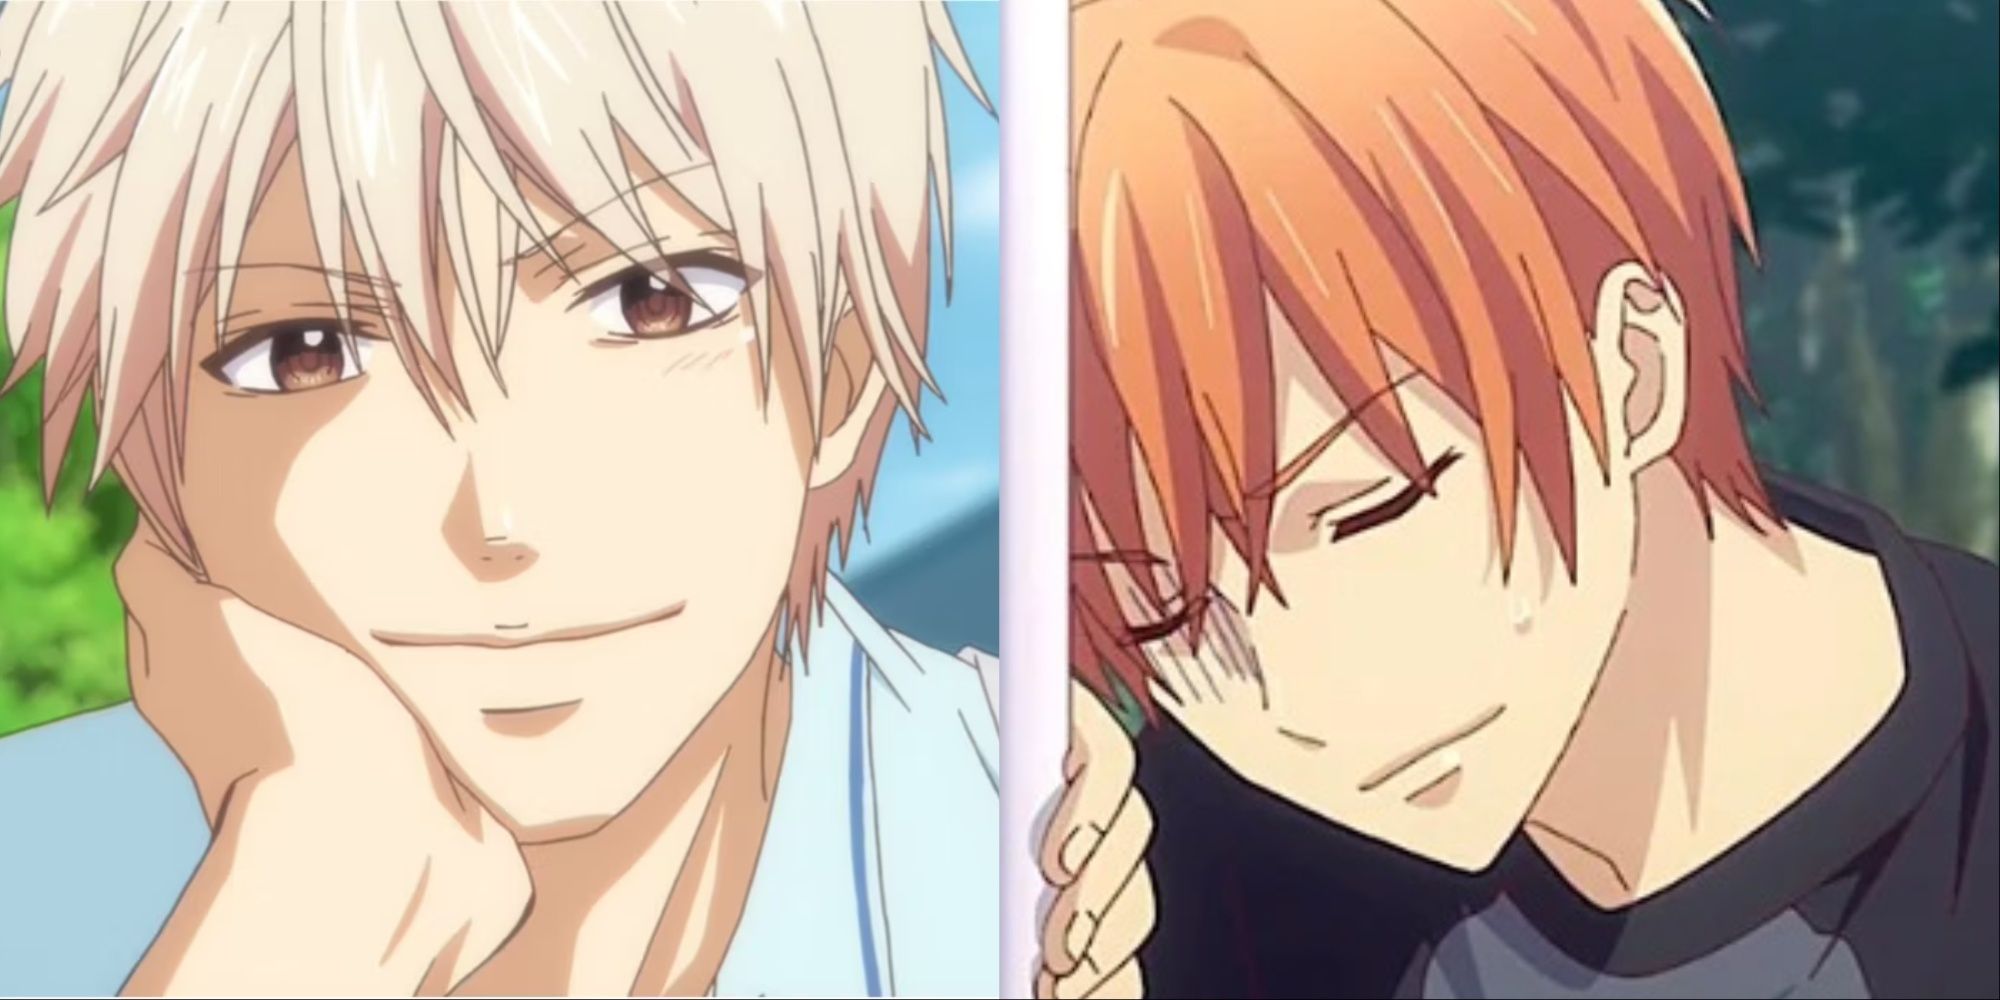 A split image ofChika Kyo from Sounds Of Life and Kyo from Fruits Basket anime